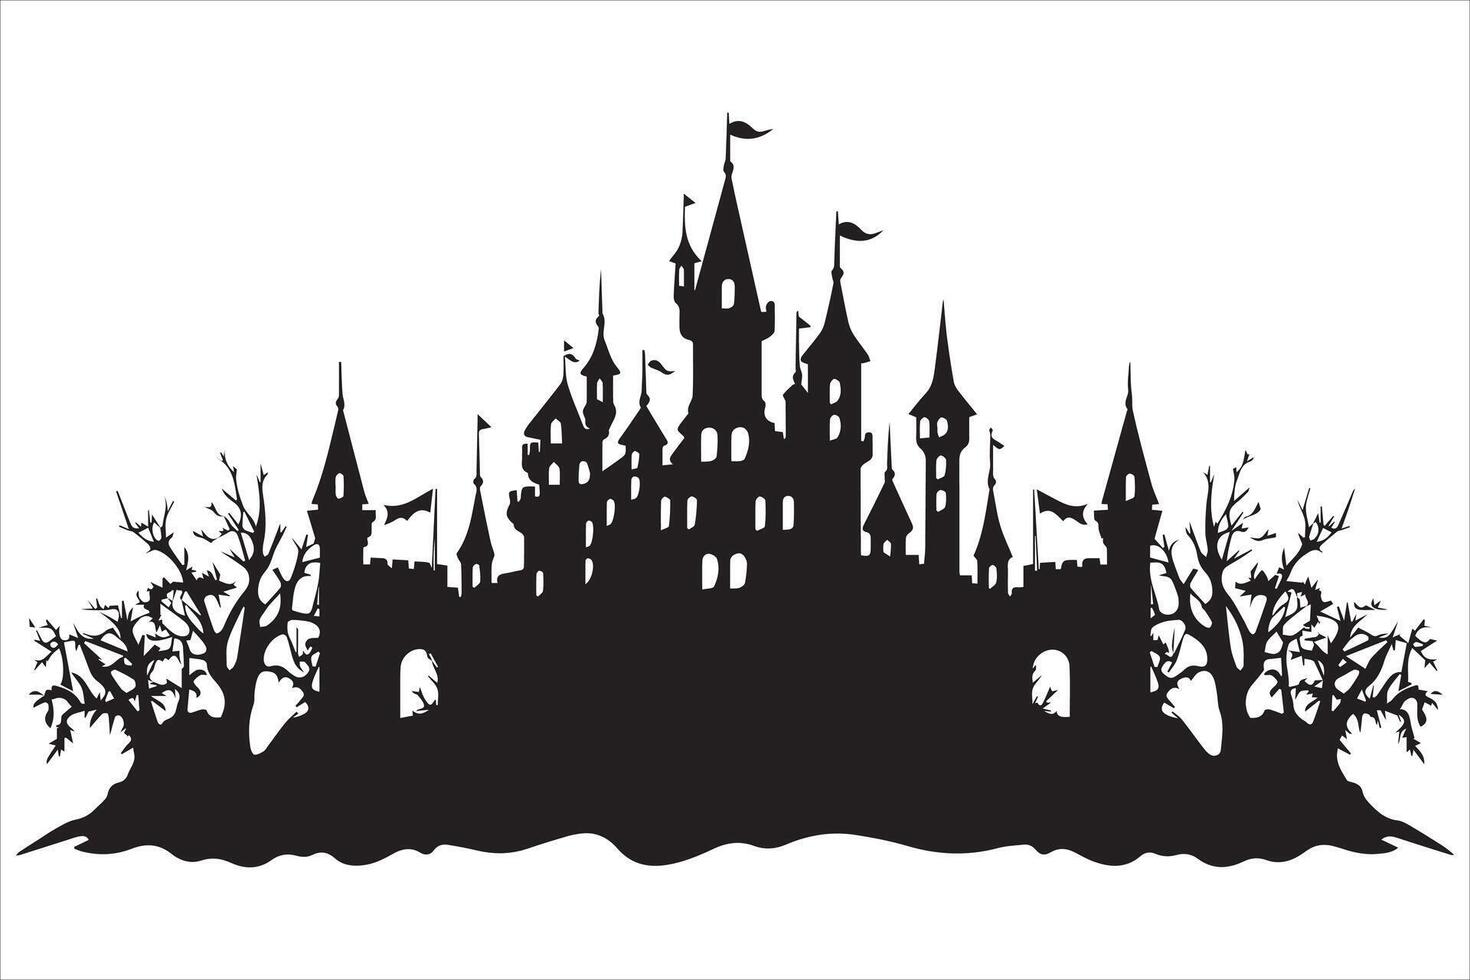 Halloween witch house silhouette pro vector